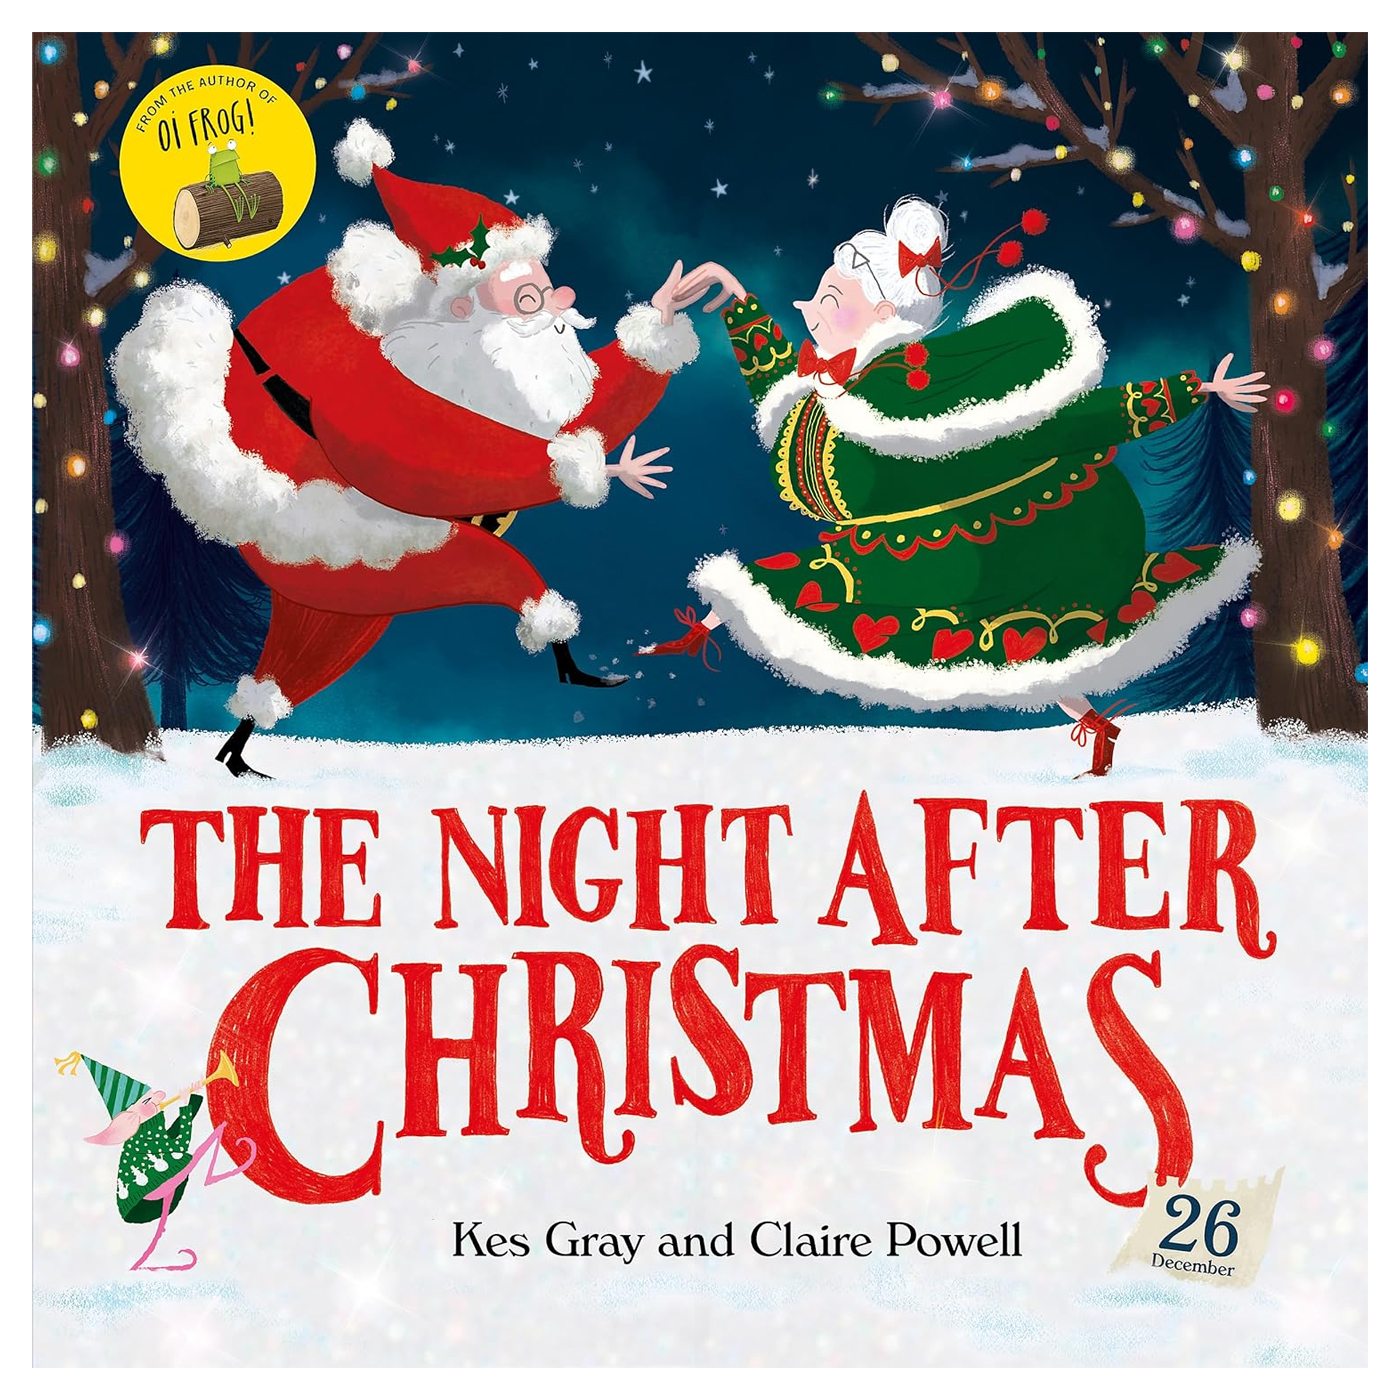  The Night After Christmas